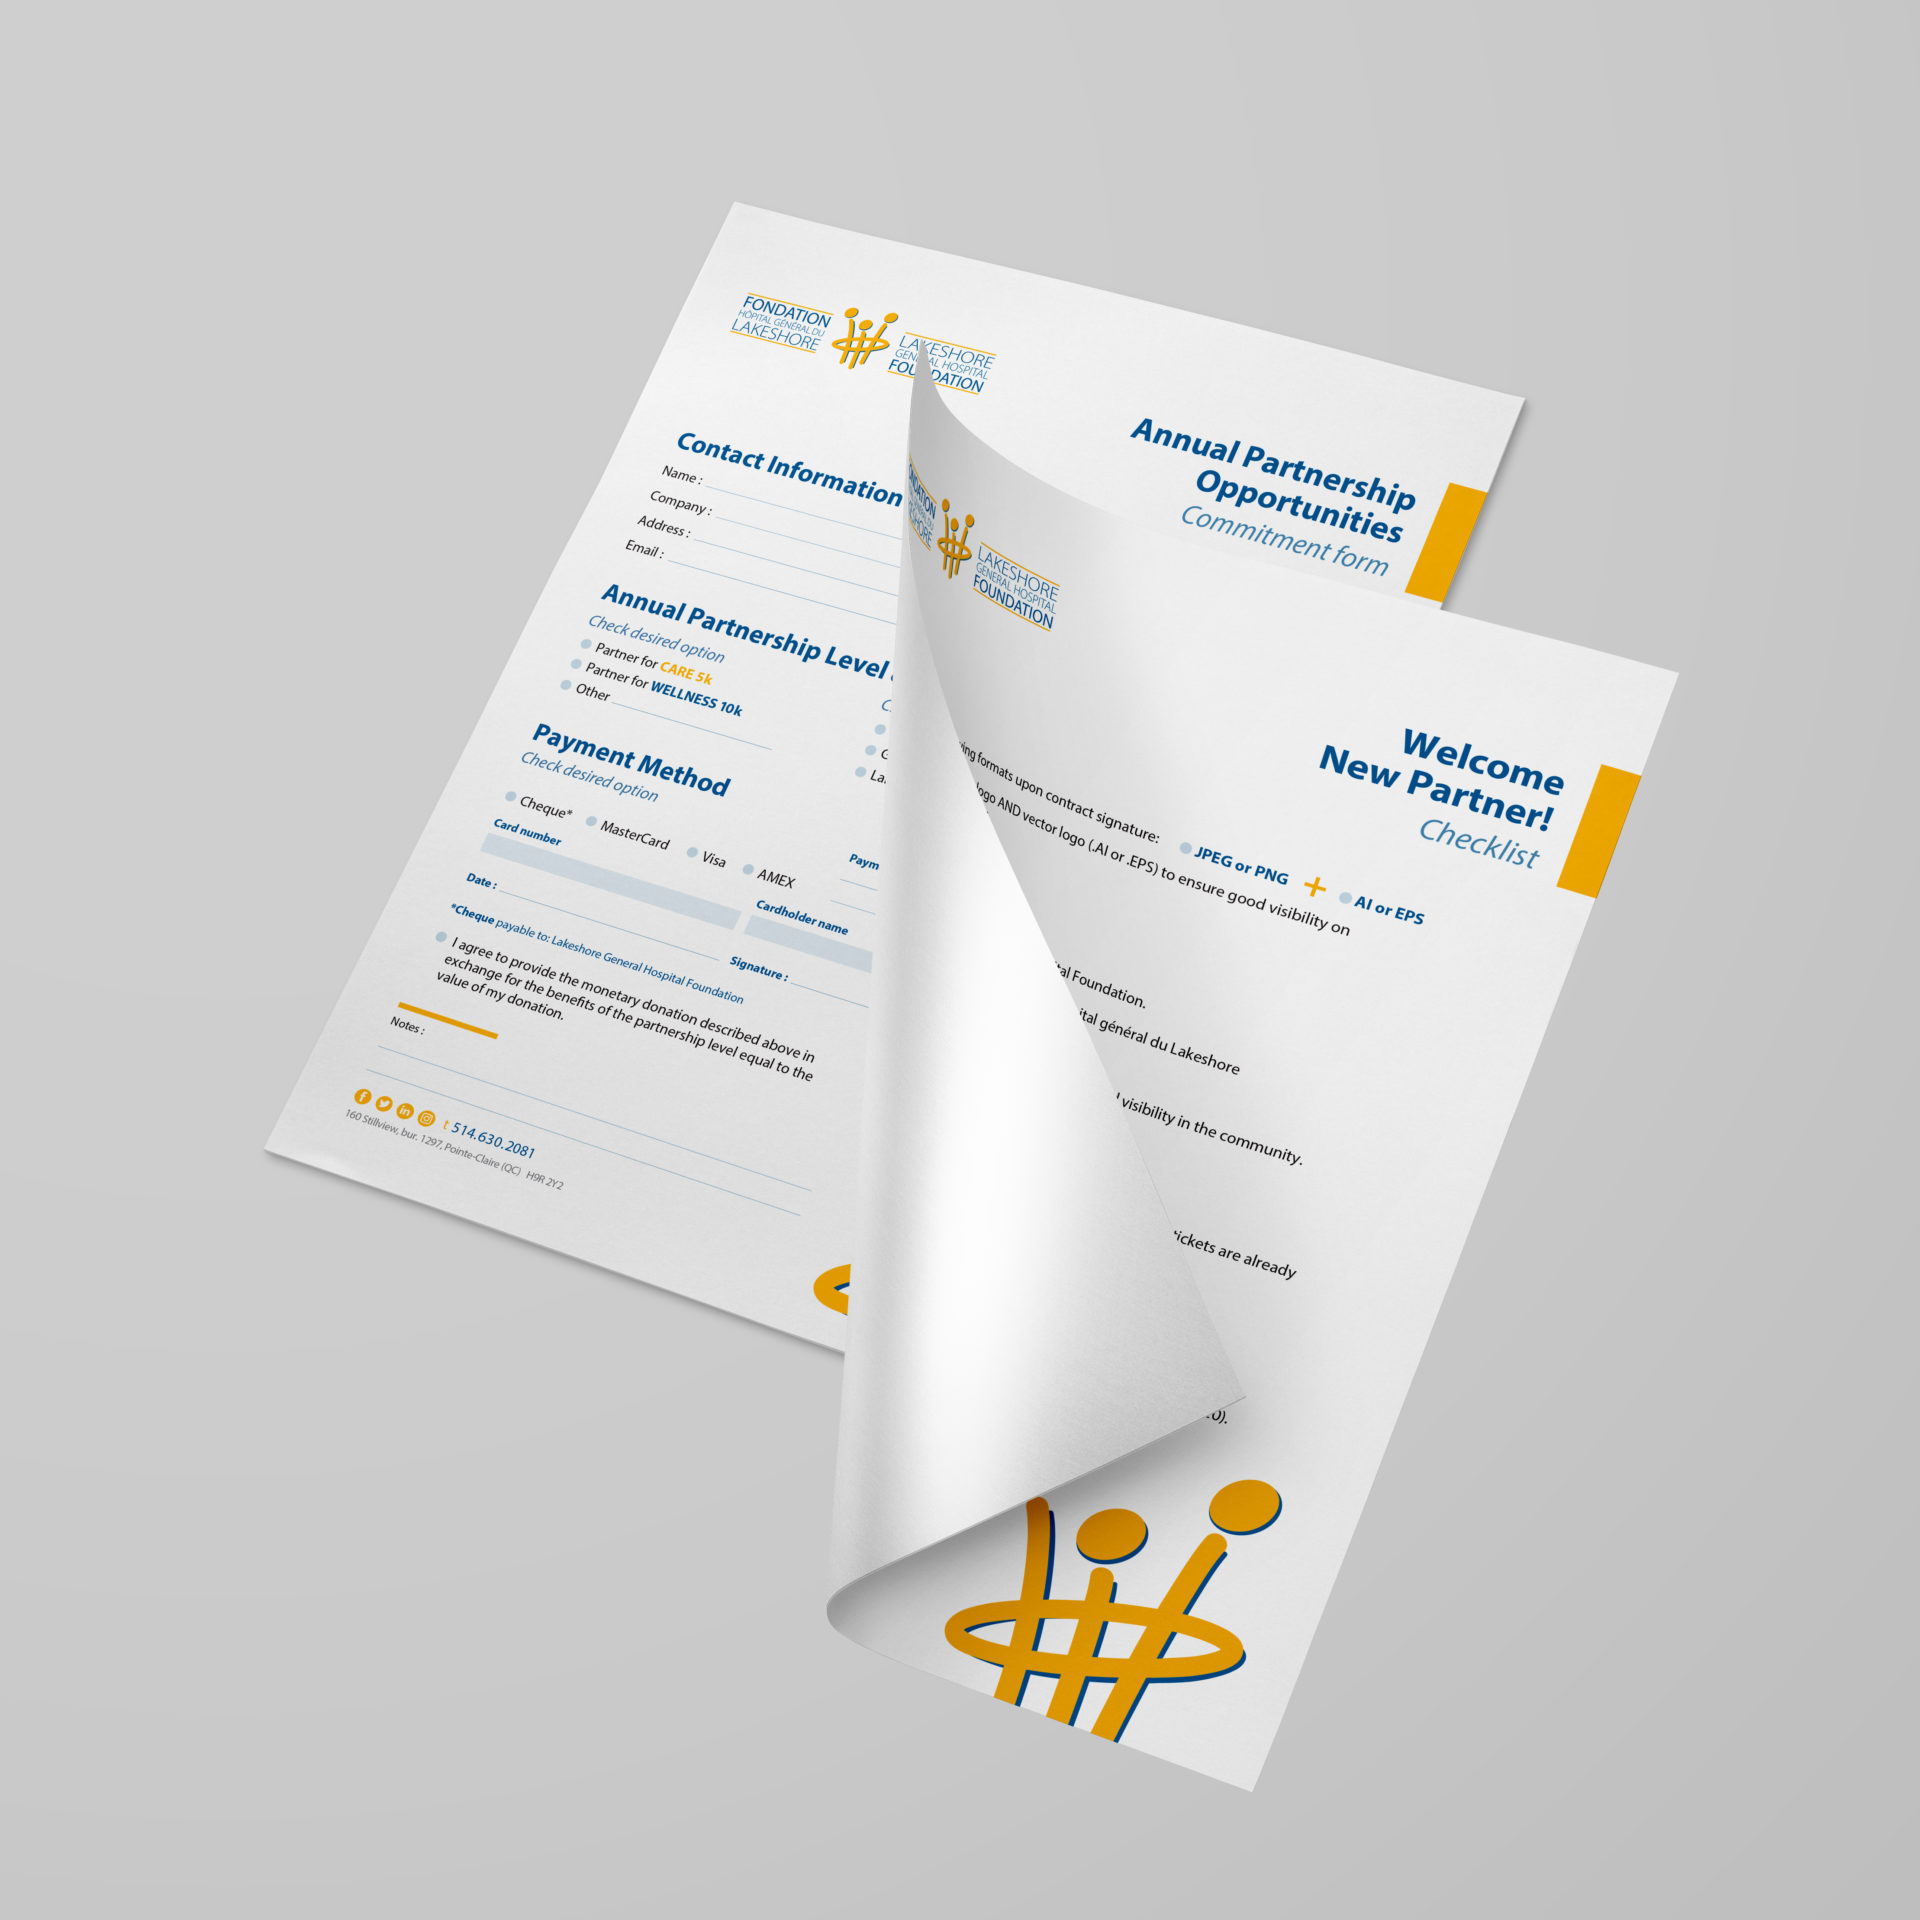 Annual Partnership Partner forms on white paper with blue and black text and yellow accents.